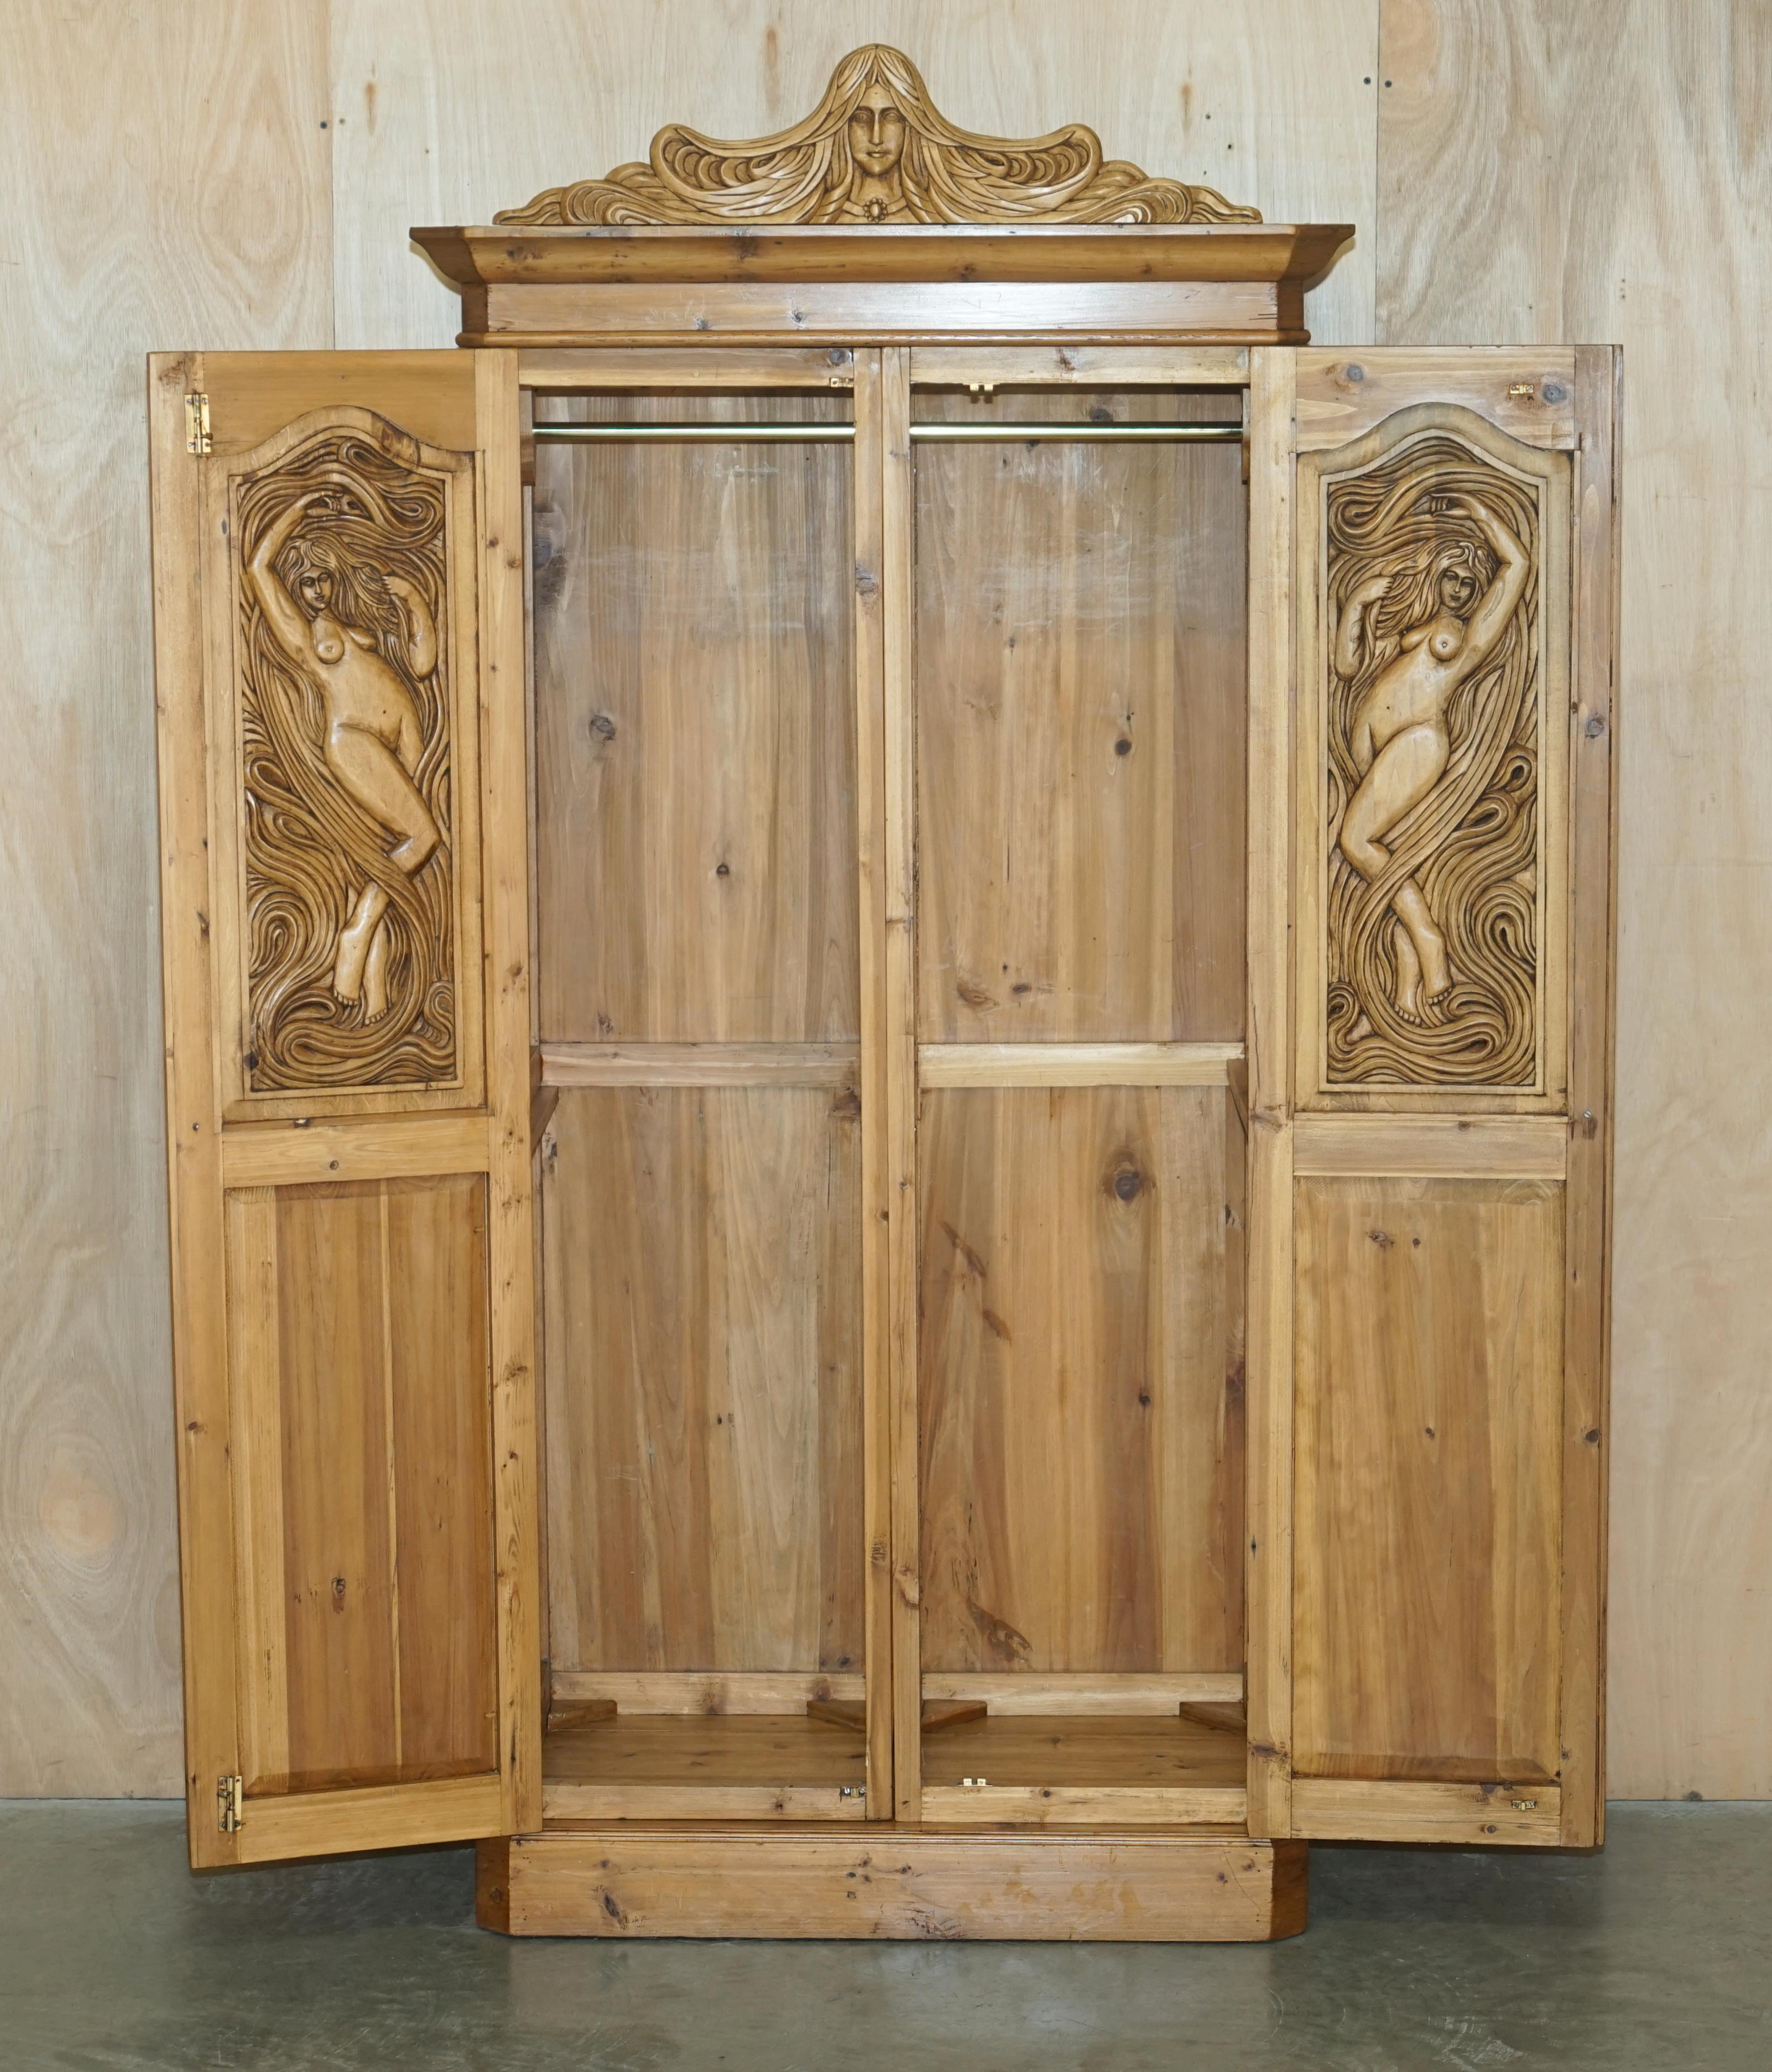 Hand-Crafted EXQUISITE ViNTAGE HAND CARVED ART NOUVEAU PINE WARDROBE NUDE NYMPHS INSIDE For Sale